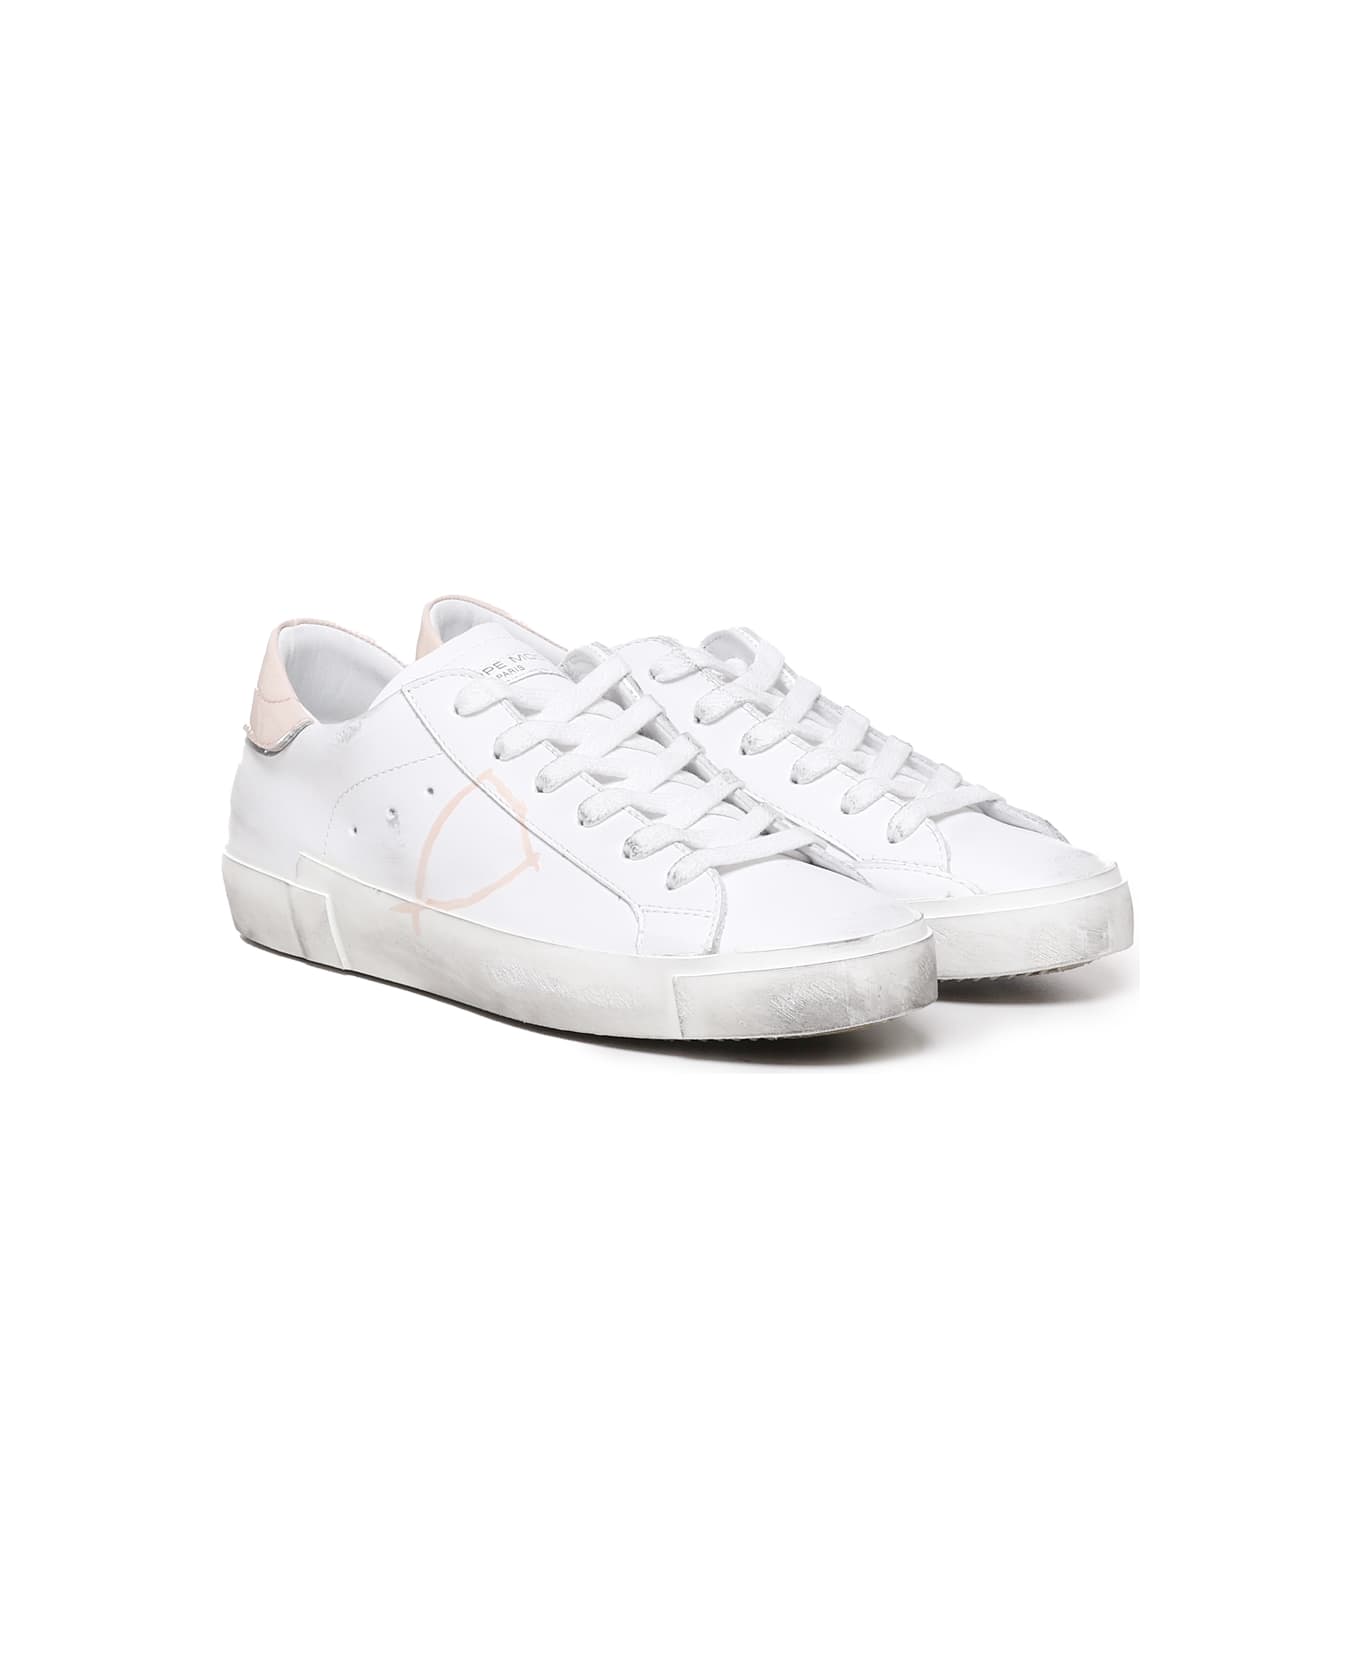 Philippe Model Prsx Casual Leather Sneaker - White, pink